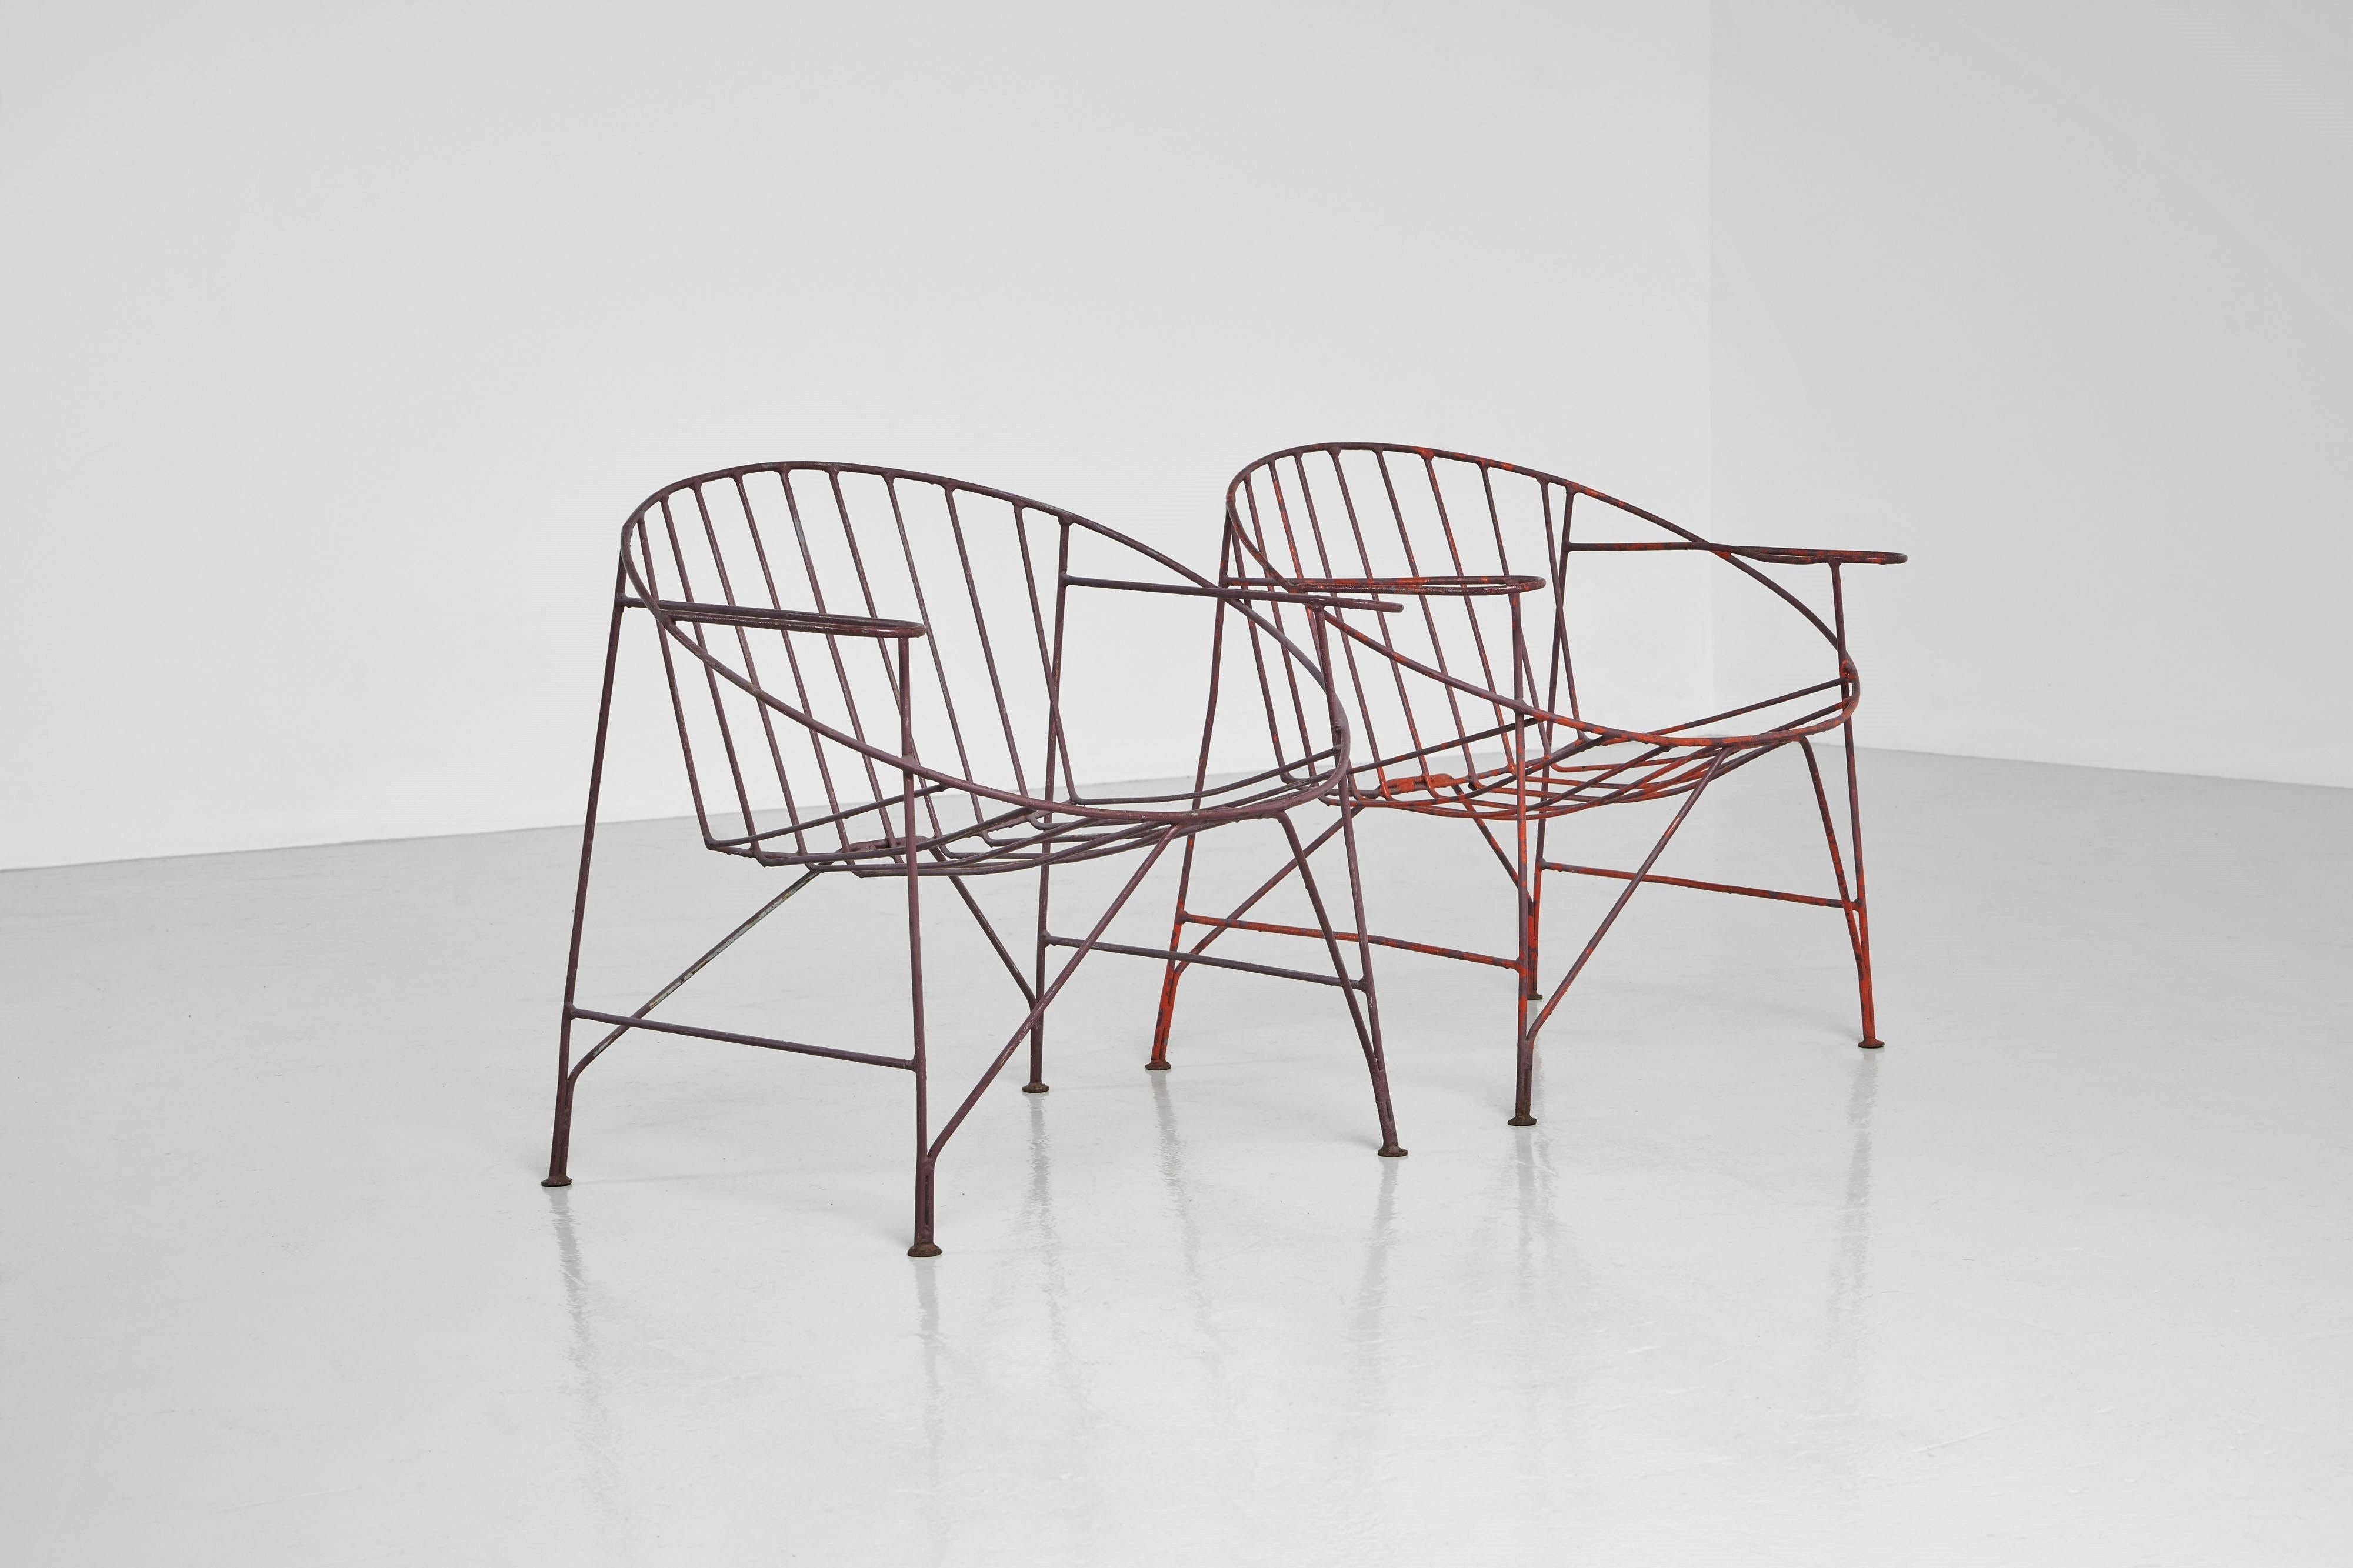 Beautiful iron garden chairs in the style of Mathieu Mategot and Jean Royère made in France 1950. While the manufacturer remains unknown, these chairs beautifully capture the essence of their renowned designs. With their round shape and bend metal